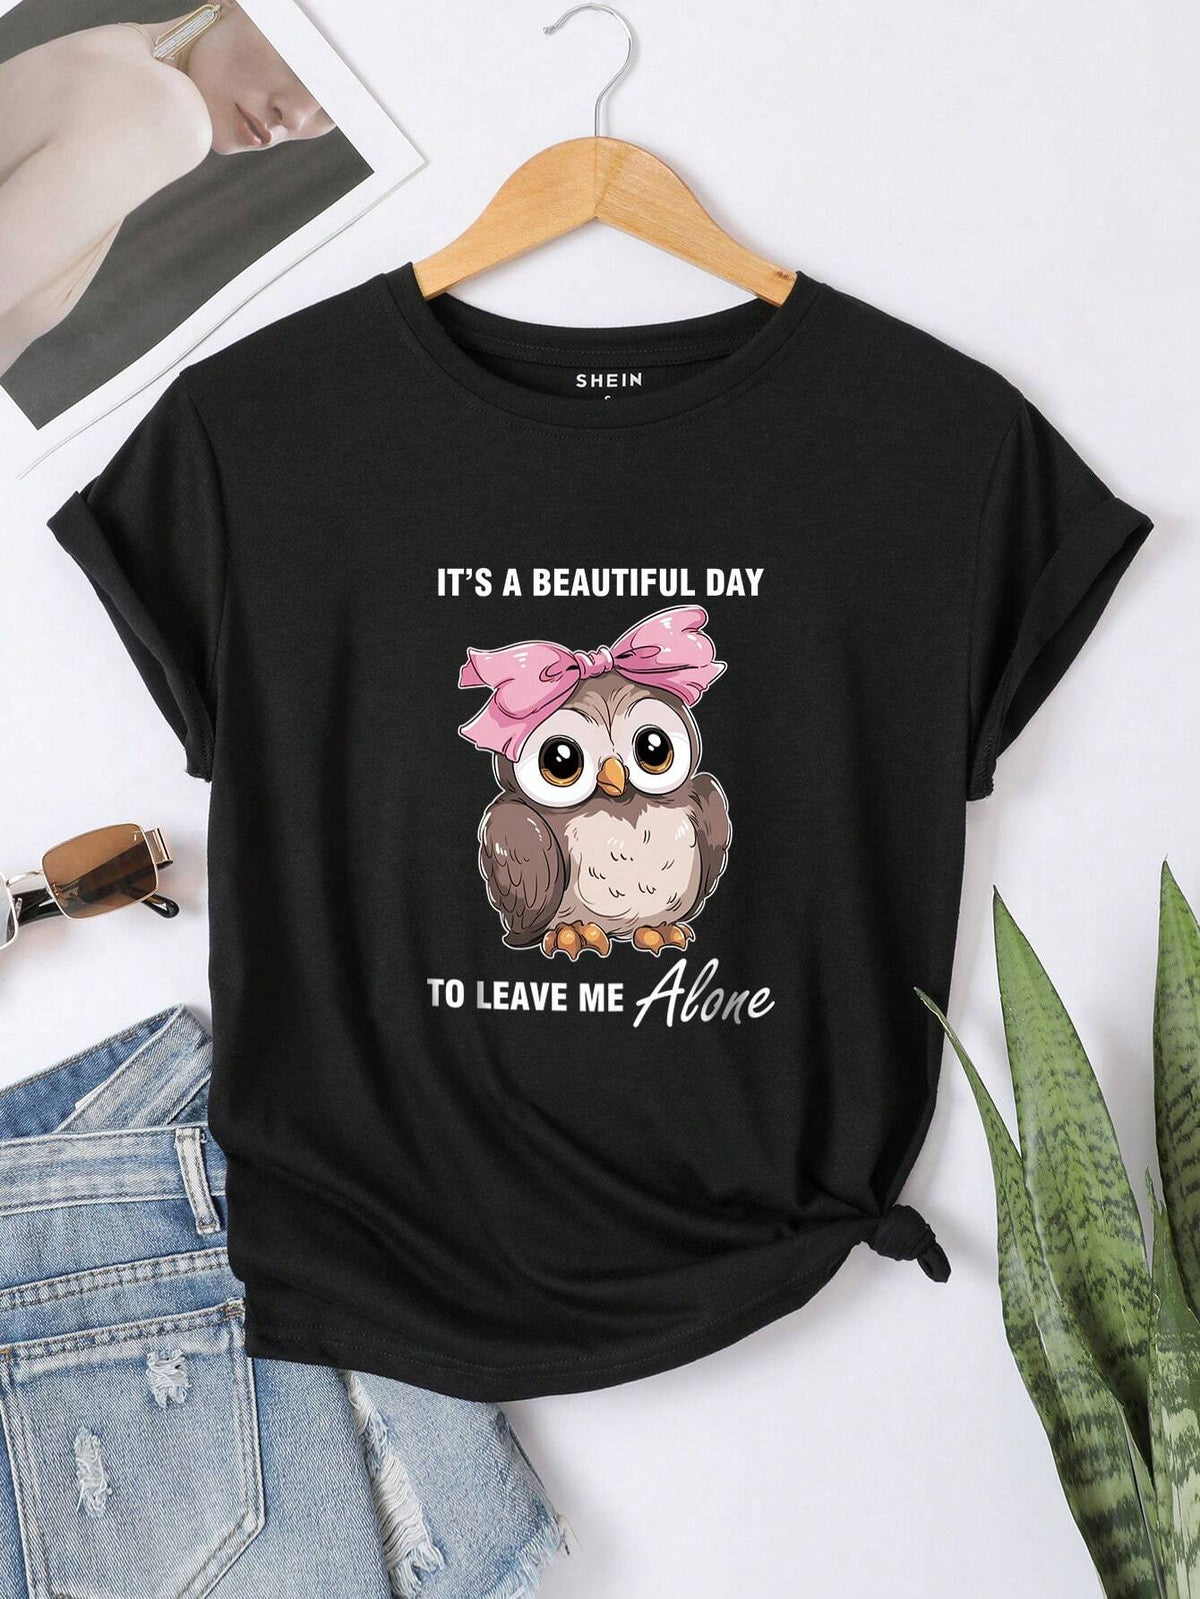 Owl And Slogan Graphic Tee